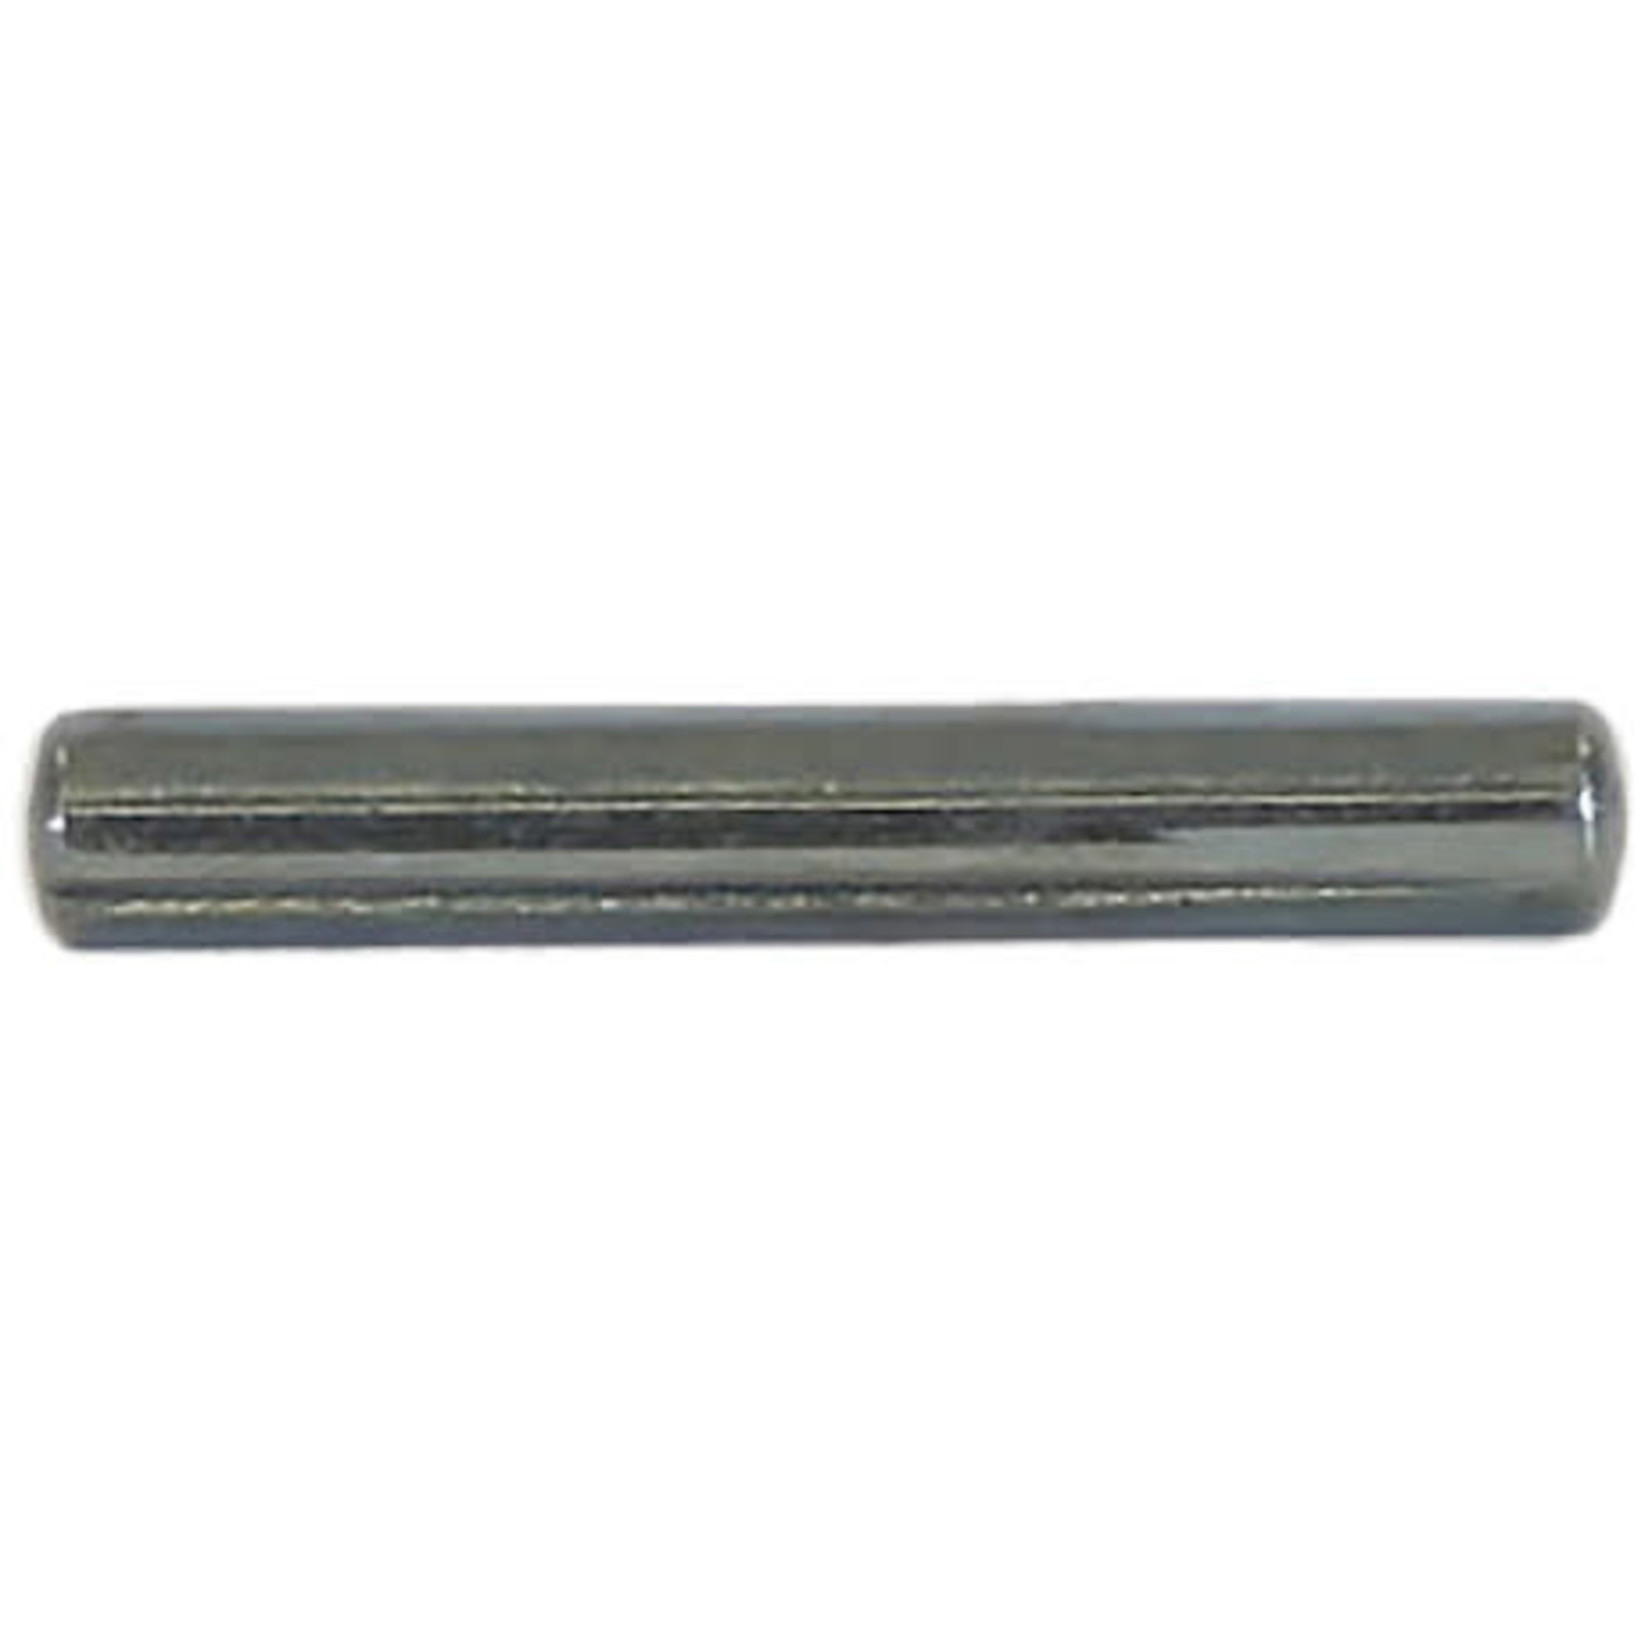 Buyers Products Company SAM Groove Pin 3/16 x 1-1/4 Inch-Replaces Western #92004